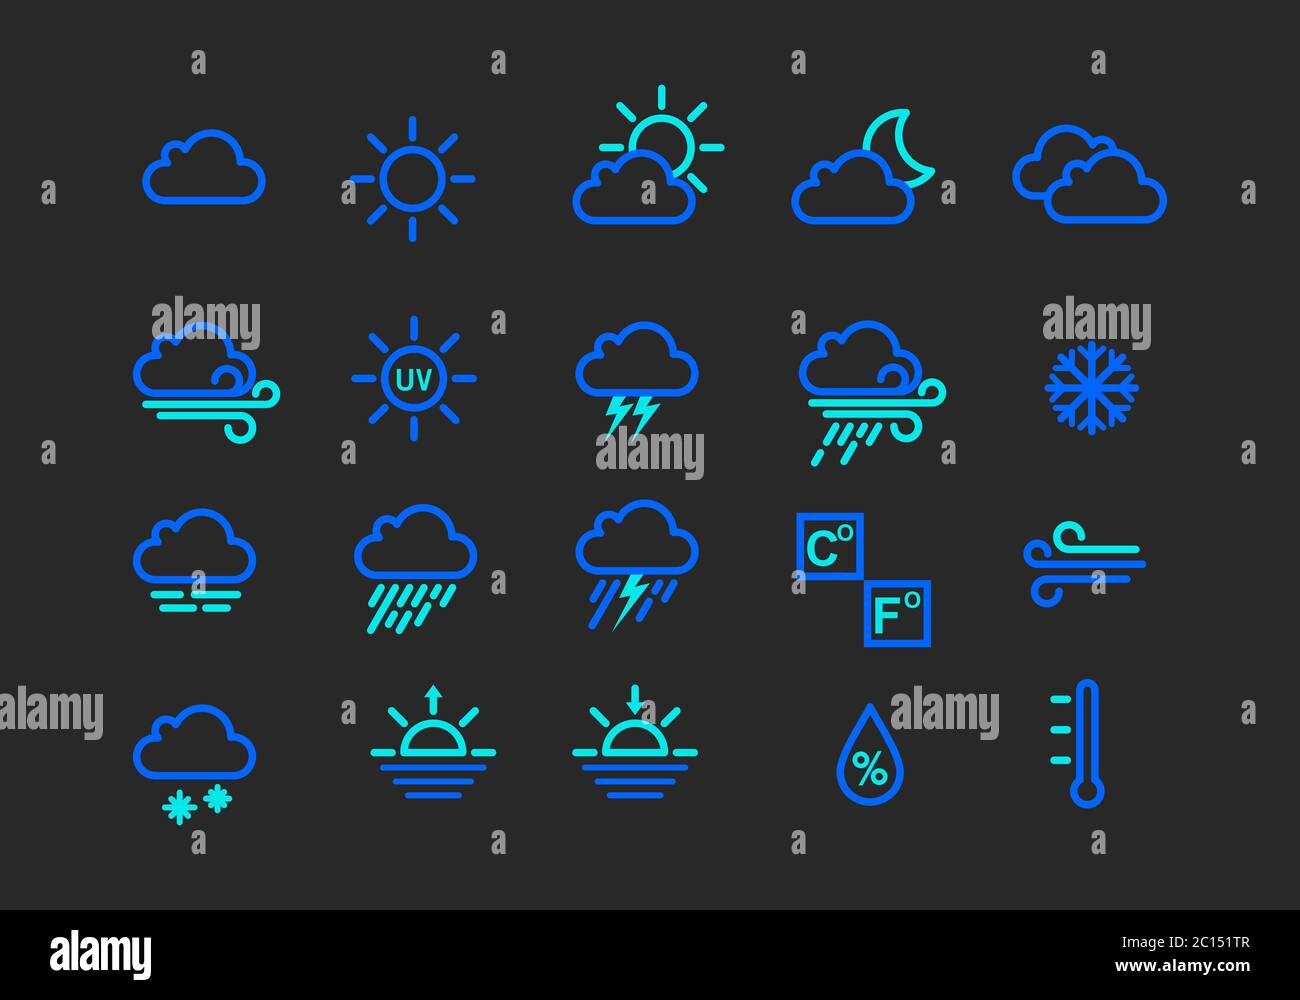 Collection of weather conditions icons with two different contrasting colors. Suitable for weather forecast report icons. Weather graphic element set. Stock Vector